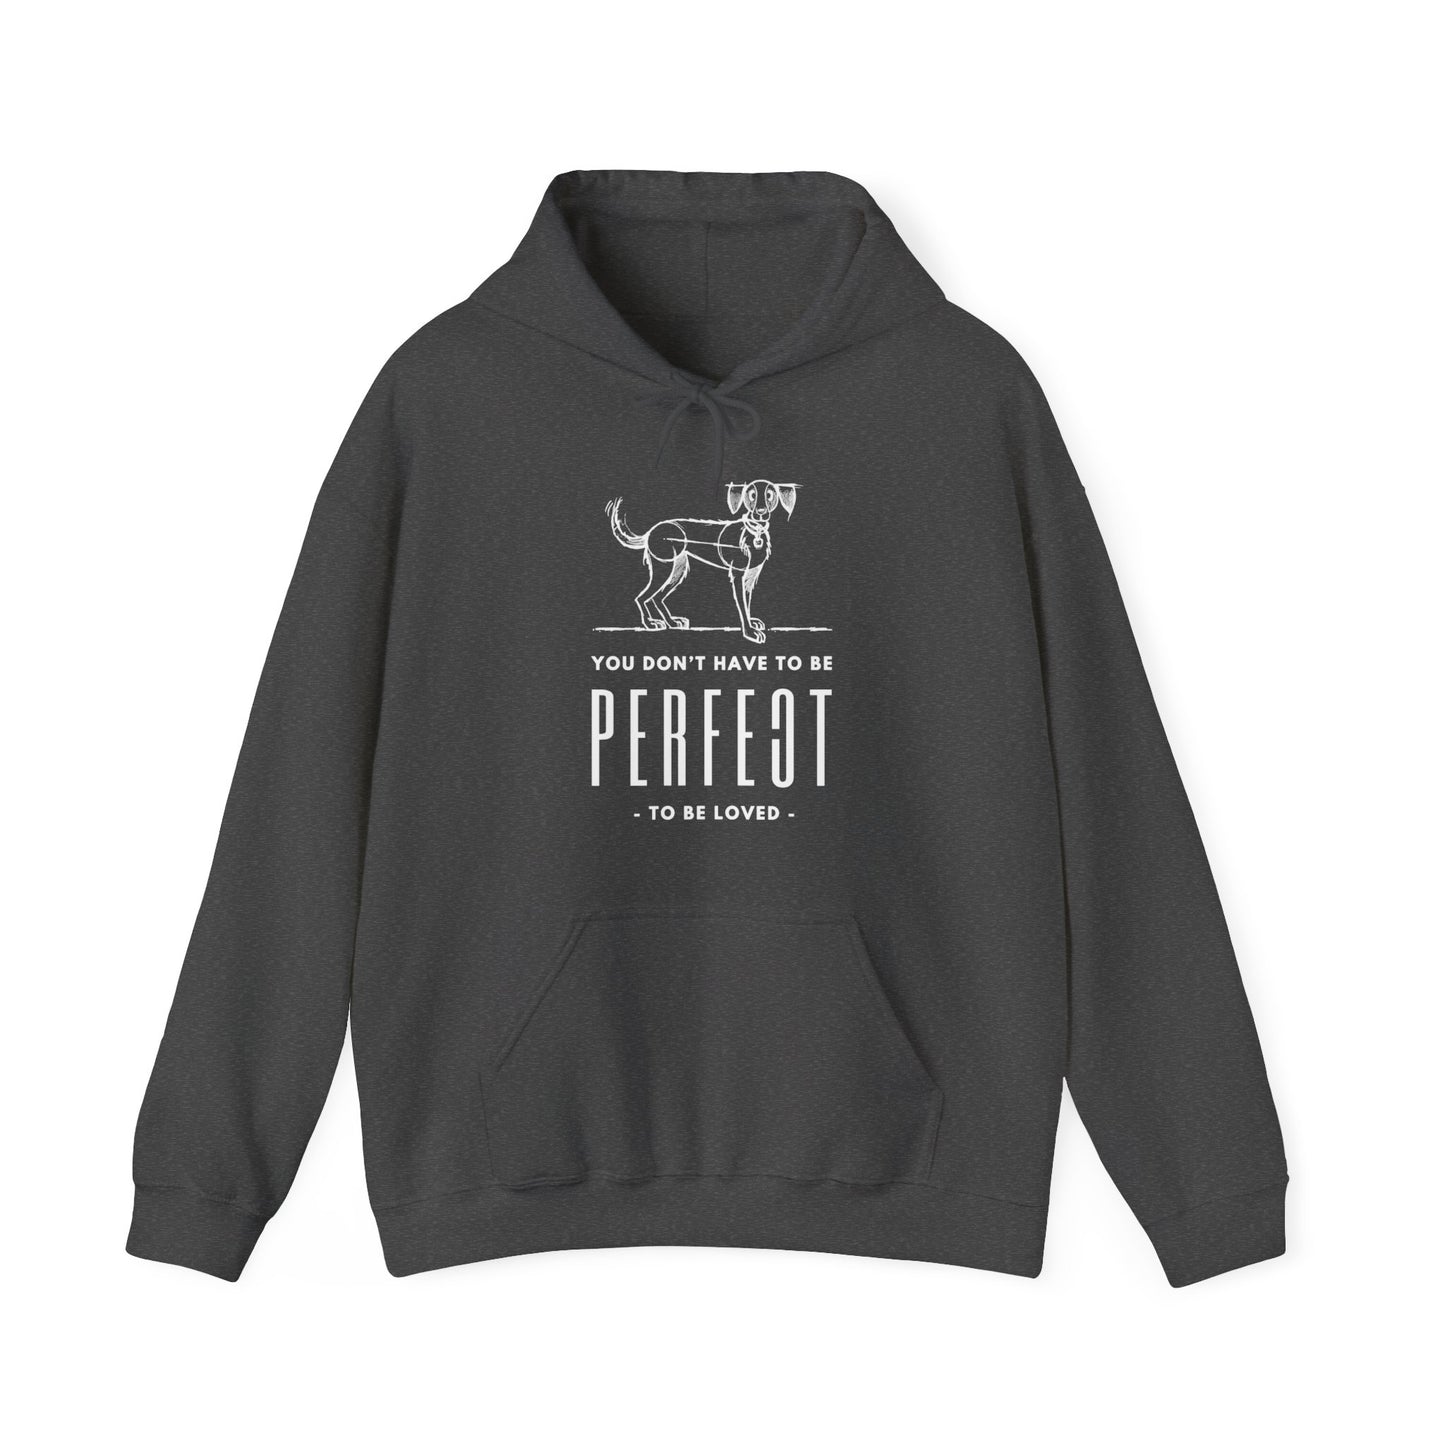  Dogs Pure Love introduces a unisex hoodie showcasing a sketch of a dog and the text 'You don't have to be perfect to be loved' in heather dark gray, against a white backdrop.